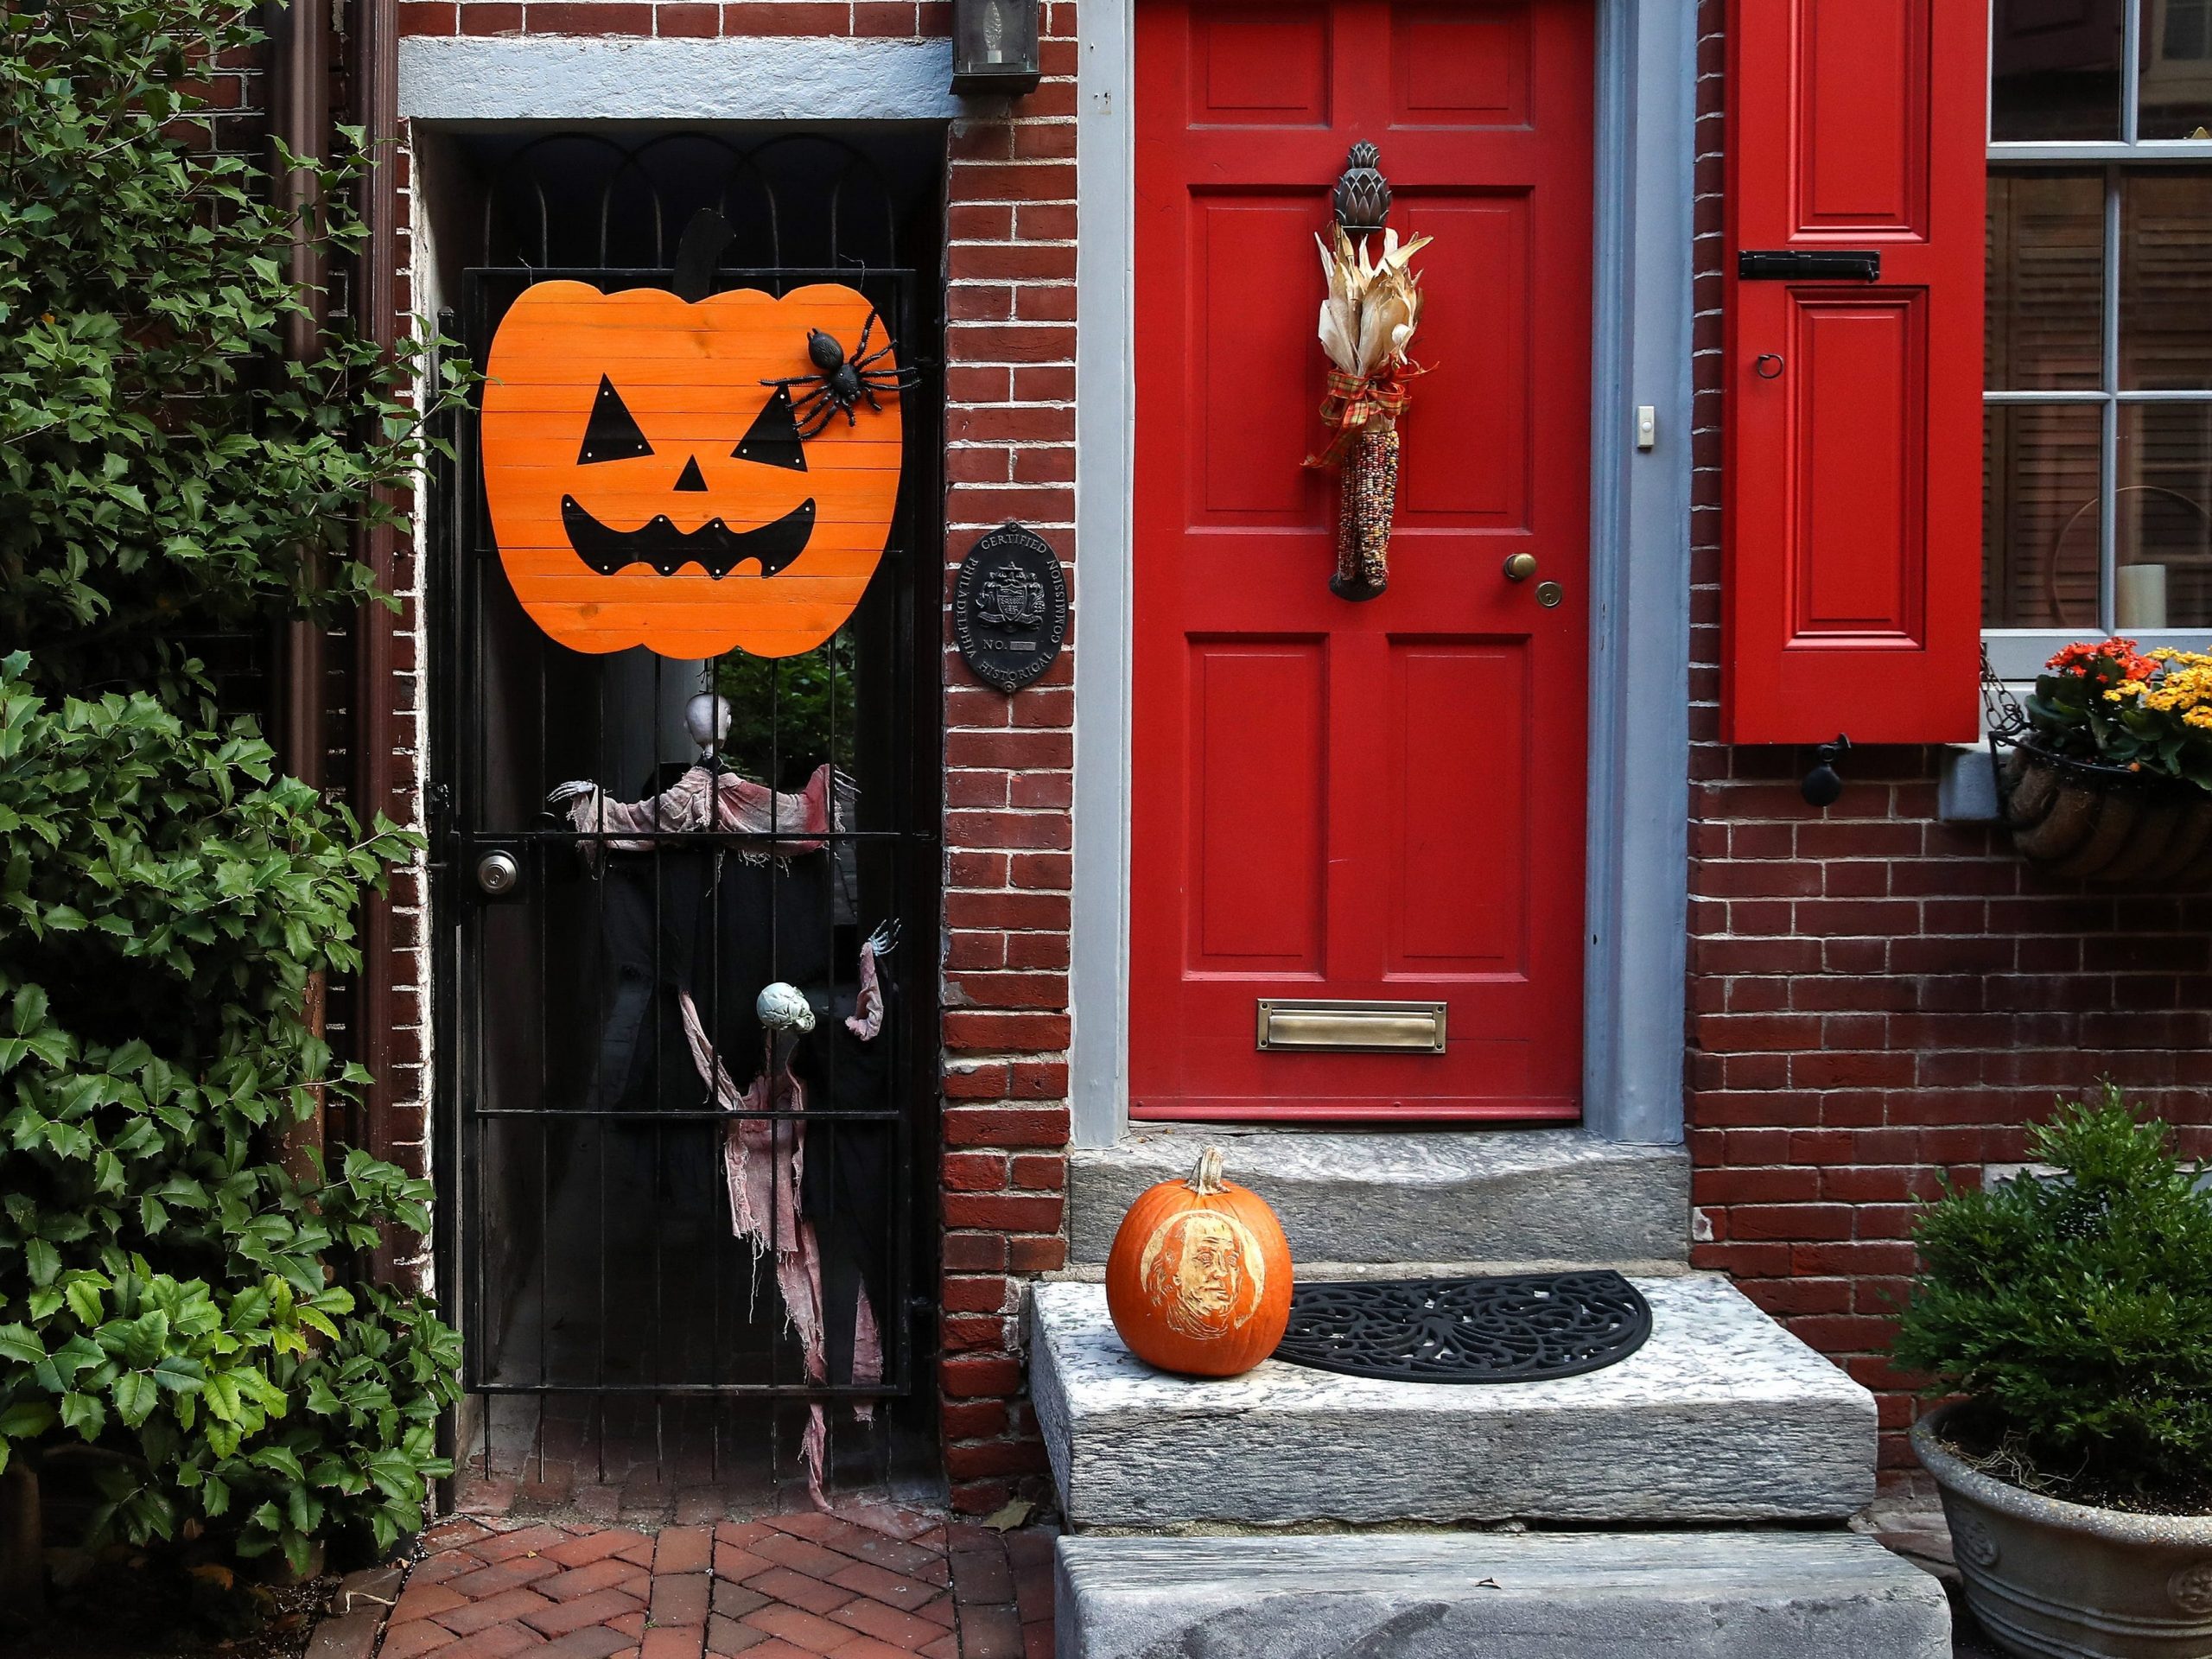 Airbnb is cracking down on parties by instating new rules for Halloween weekend.